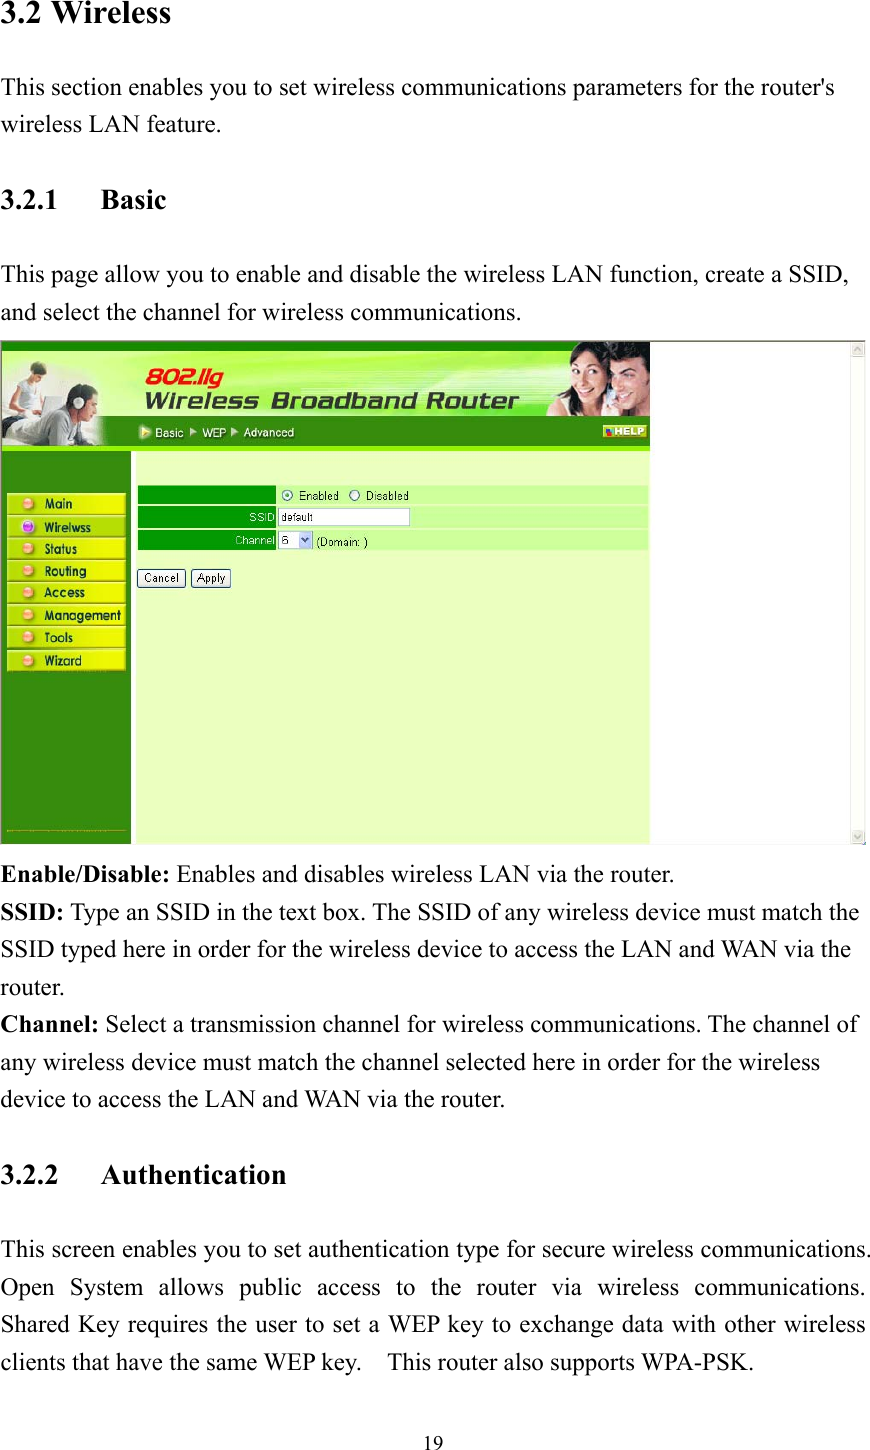  193.2 Wireless This section enables you to set wireless communications parameters for the router&apos;s wireless LAN feature. 3.2.1 Basic This page allow you to enable and disable the wireless LAN function, create a SSID, and select the channel for wireless communications.  Enable/Disable: Enables and disables wireless LAN via the router. SSID: Type an SSID in the text box. The SSID of any wireless device must match the SSID typed here in order for the wireless device to access the LAN and WAN via the router. Channel: Select a transmission channel for wireless communications. The channel of any wireless device must match the channel selected here in order for the wireless device to access the LAN and WAN via the router. 3.2.2 Authentication This screen enables you to set authentication type for secure wireless communications.   Open System allows public access to the router via wireless communications.  Shared Key requires the user to set a WEP key to exchange data with other wireless clients that have the same WEP key.    This router also supports WPA-PSK. 